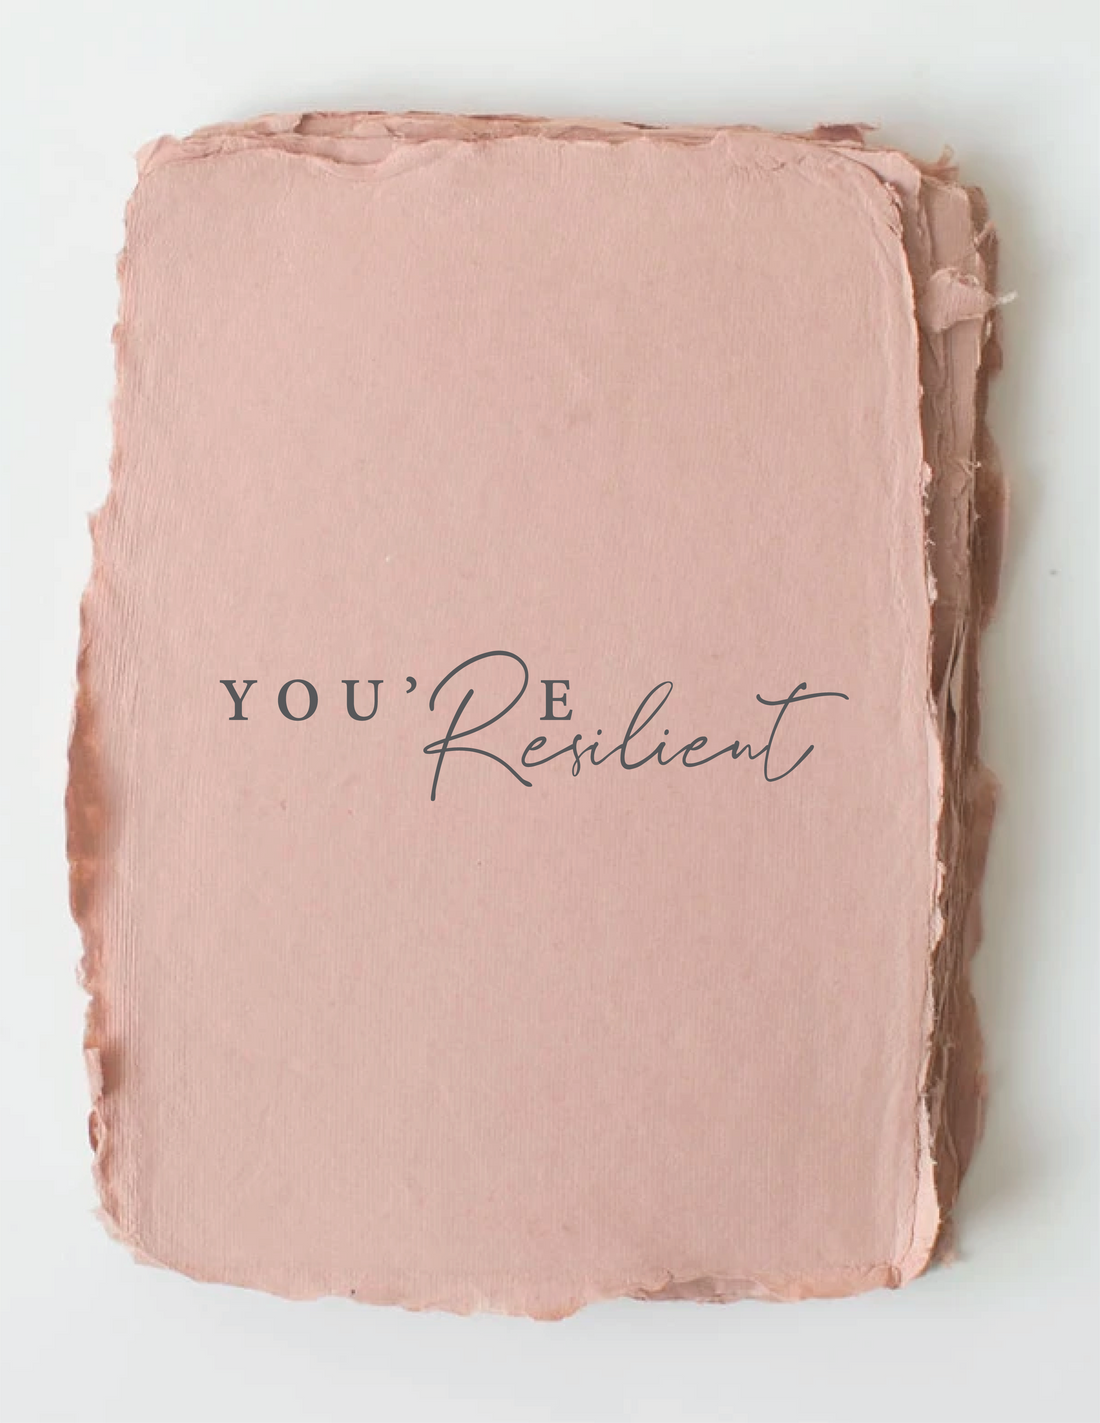 You're Resilient Card